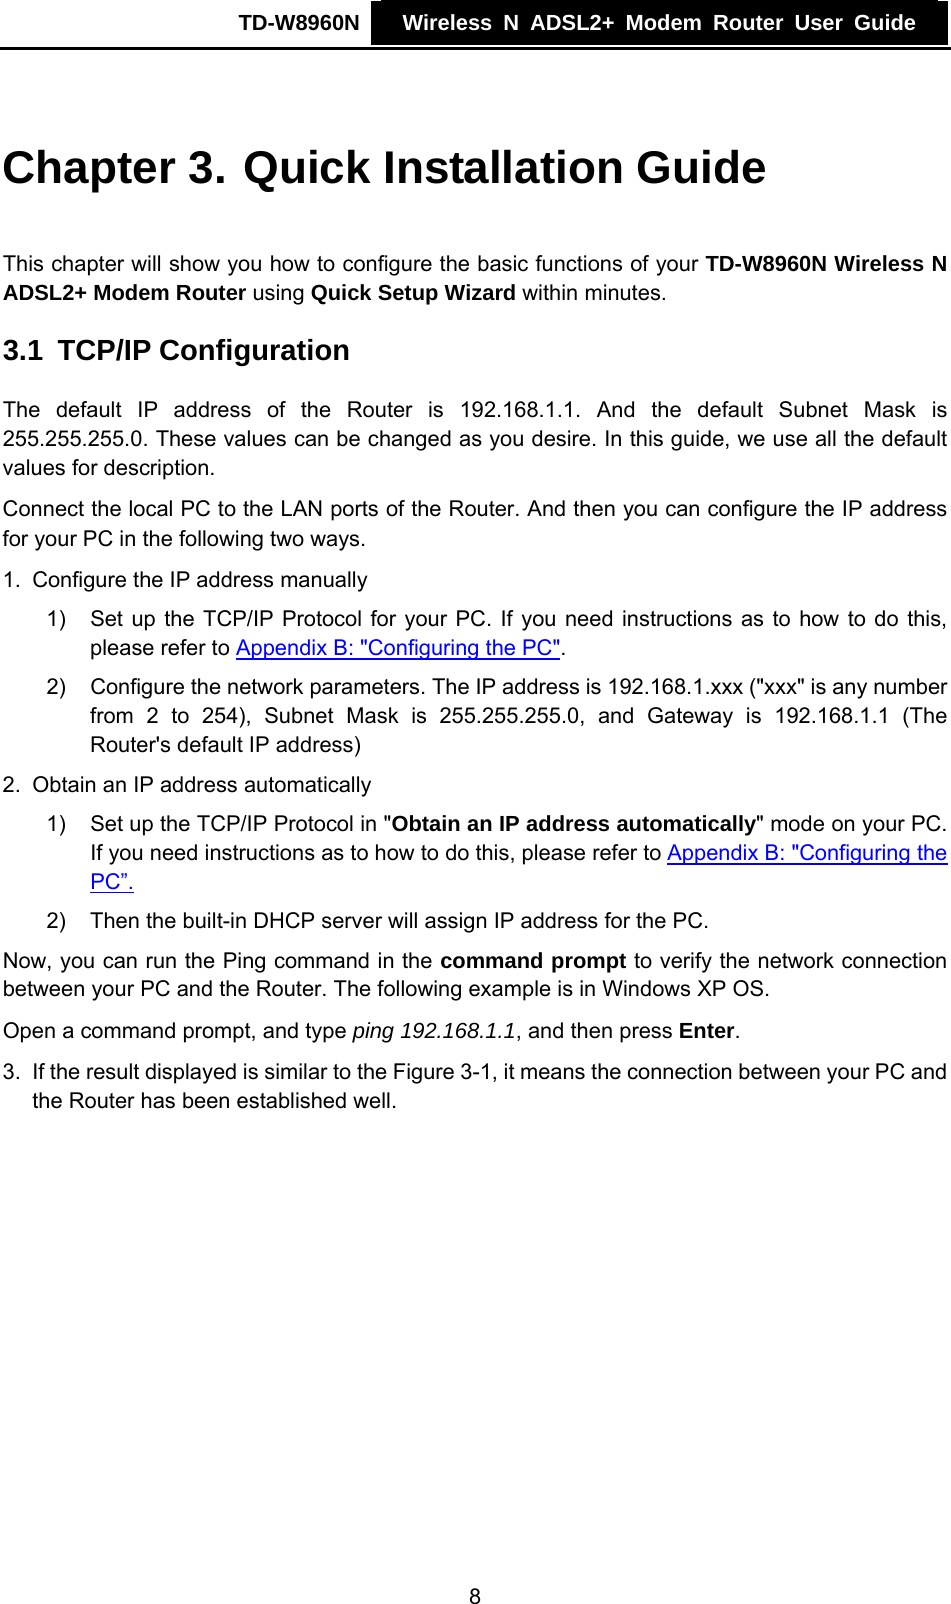 TD-W8960N    Wireless N ADSL2+ Modem Router User Guide    Chapter 3. Quick Installation Guide This chapter will show you how to configure the basic functions of your TD-W8960N Wireless N ADSL2+ Modem Router using Quick Setup Wizard within minutes. 3.1  TCP/IP Configuration The default IP address of the Router is 192.168.1.1. And the default Subnet Mask is 255.255.255.0. These values can be changed as you desire. In this guide, we use all the default values for description. Connect the local PC to the LAN ports of the Router. And then you can configure the IP address for your PC in the following two ways. 1.  Configure the IP address manually 1)  Set up the TCP/IP Protocol for your PC. If you need instructions as to how to do this, please refer to Appendix B: &quot;Configuring the PC&quot;. 2)  Configure the network parameters. The IP address is 192.168.1.xxx (&quot;xxx&quot; is any number from 2 to 254), Subnet Mask is 255.255.255.0, and Gateway is 192.168.1.1 (The Router&apos;s default IP address) 2.  Obtain an IP address automatically 1)  Set up the TCP/IP Protocol in &quot;Obtain an IP address automatically&quot; mode on your PC. If you need instructions as to how to do this, please refer to Appendix B: &quot;Configuring the PC”. 2)  Then the built-in DHCP server will assign IP address for the PC. Now, you can run the Ping command in the command prompt to verify the network connection between your PC and the Router. The following example is in Windows XP OS. Open a command prompt, and type ping 192.168.1.1, and then press Enter. 3.  If the result displayed is similar to the Figure 3-1, it means the connection between your PC and the Router has been established well.   8 